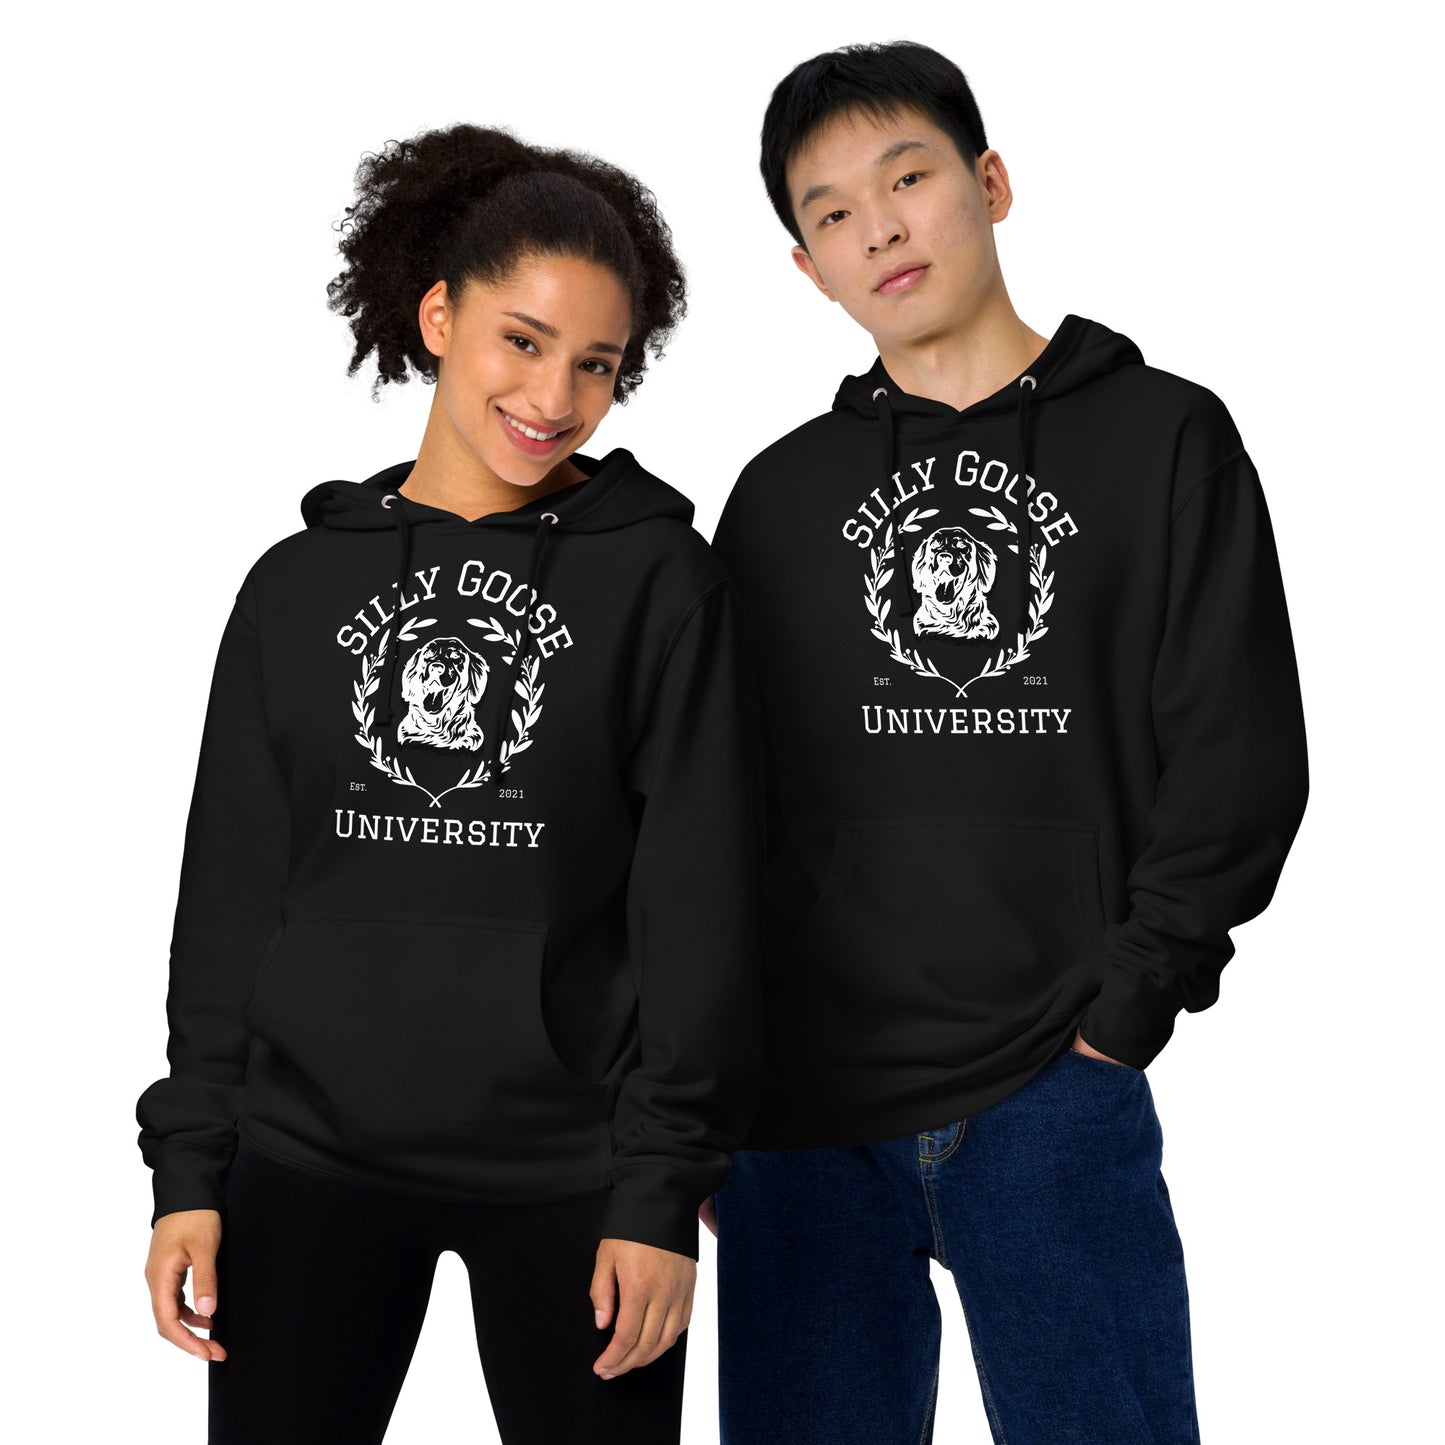 Silly Goose University Unisex midweight hoodie